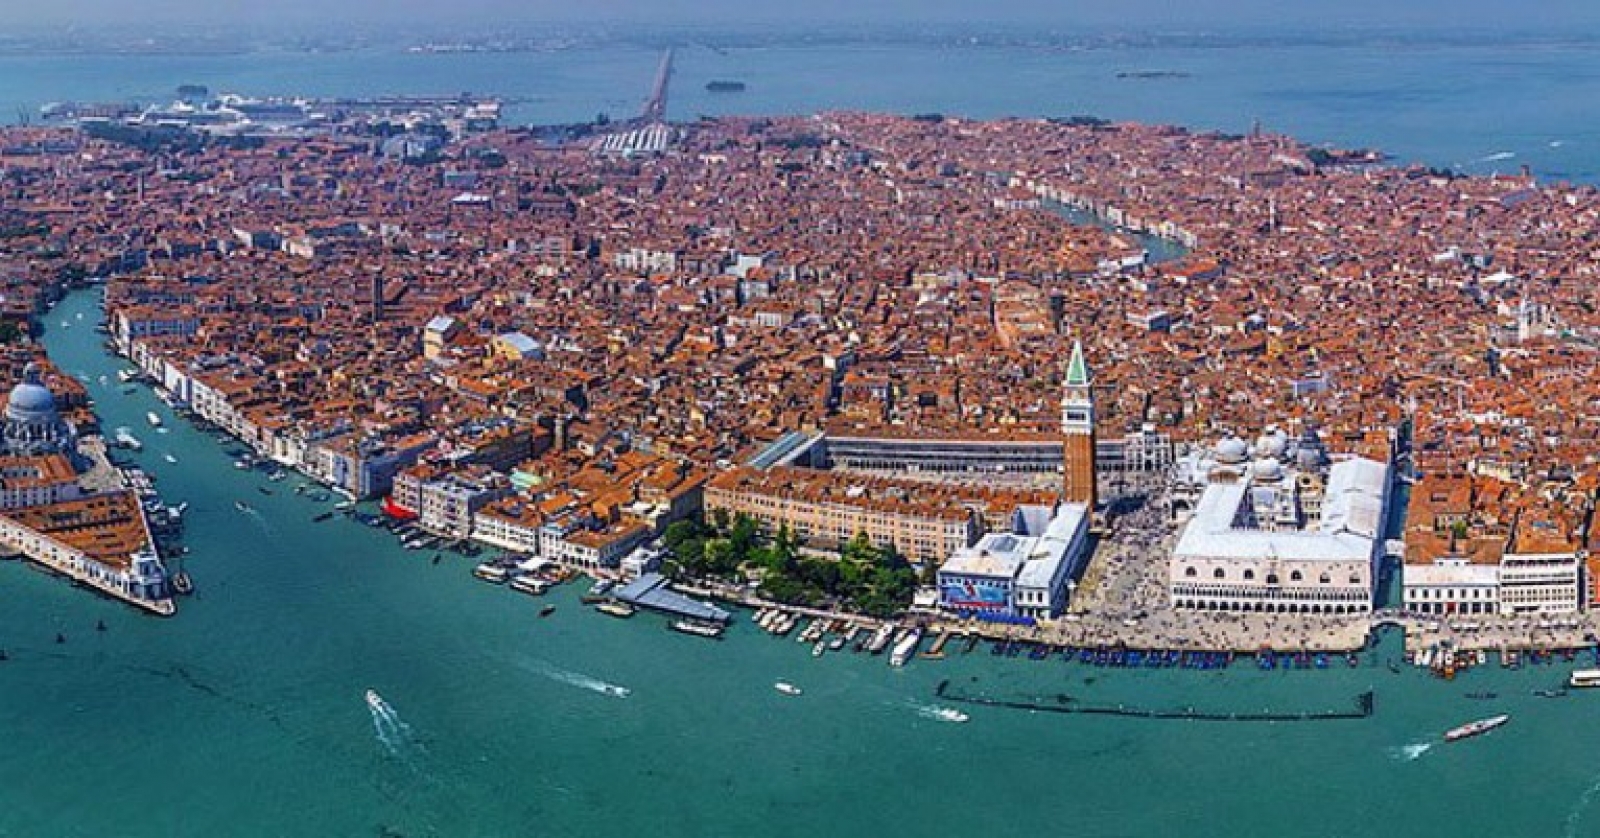 Venice seen from above